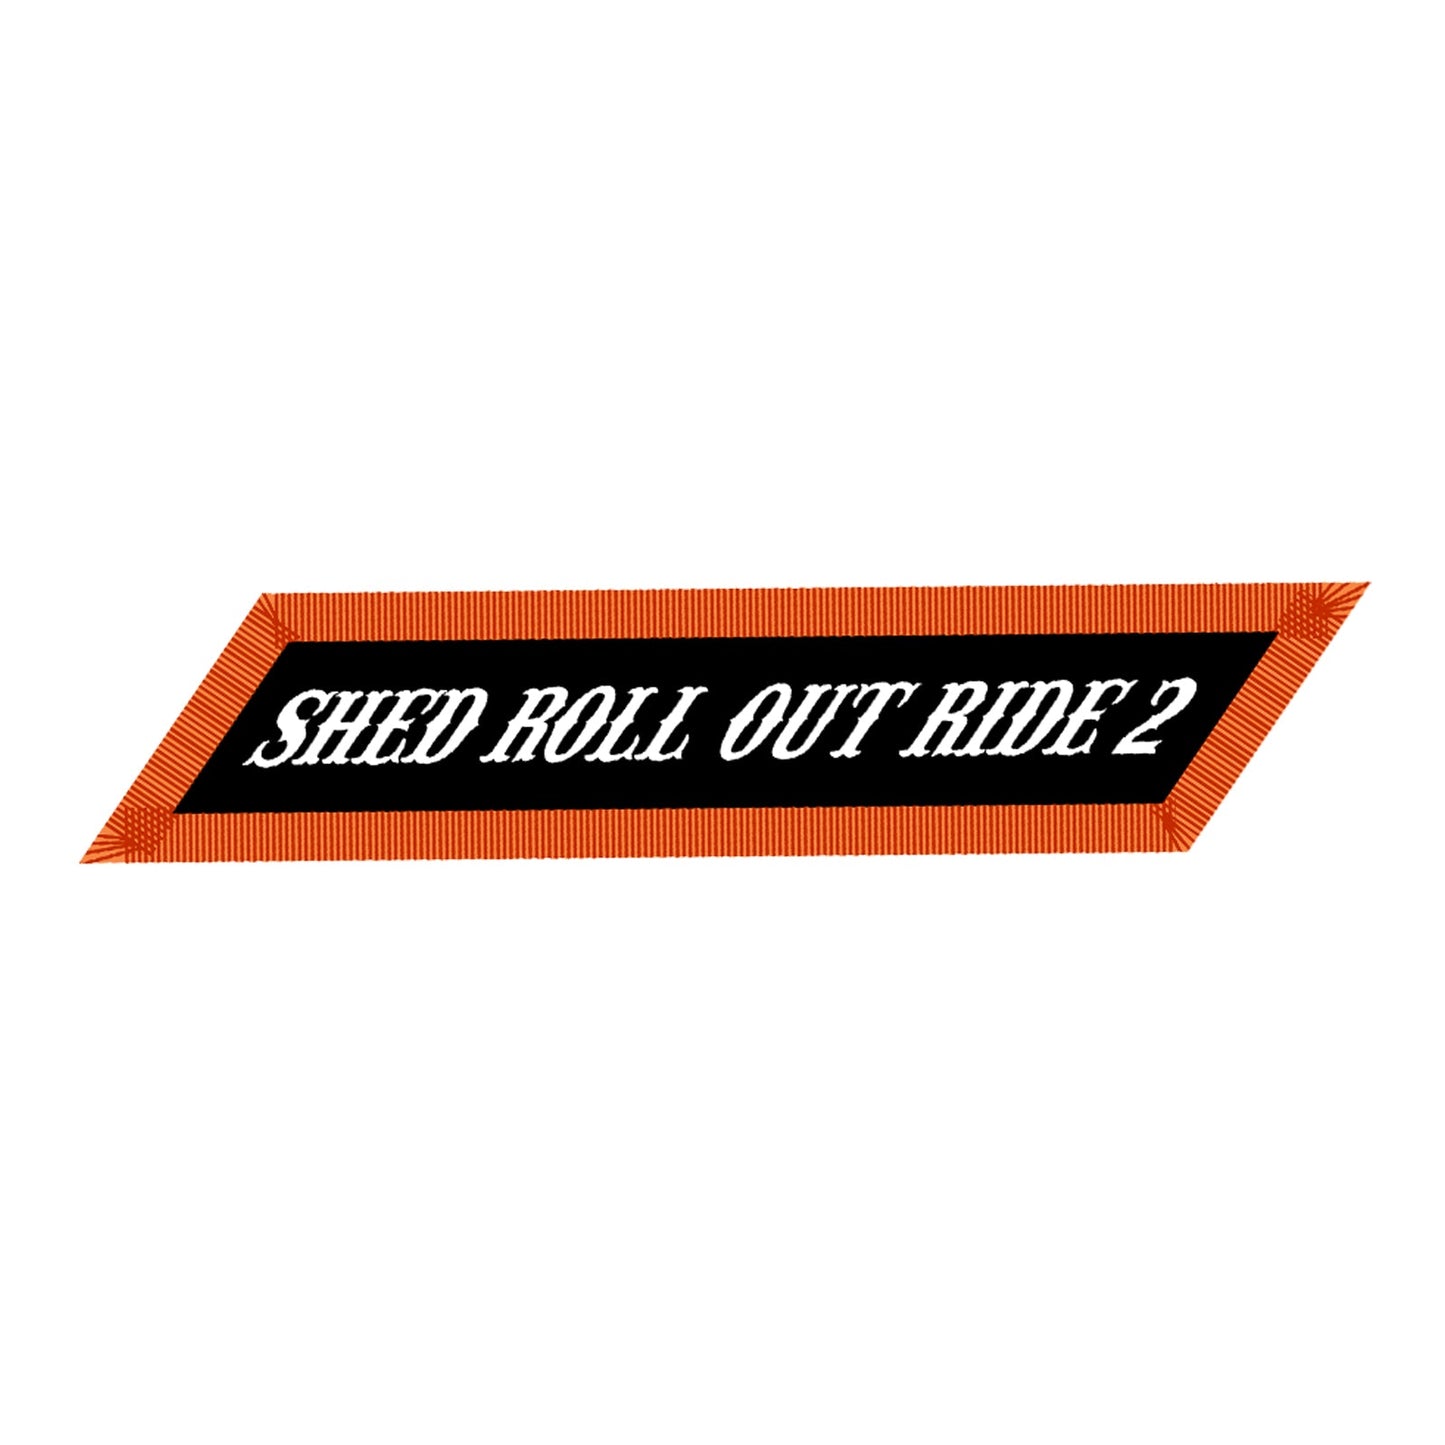 Shed Roll Out Sleeve Patch